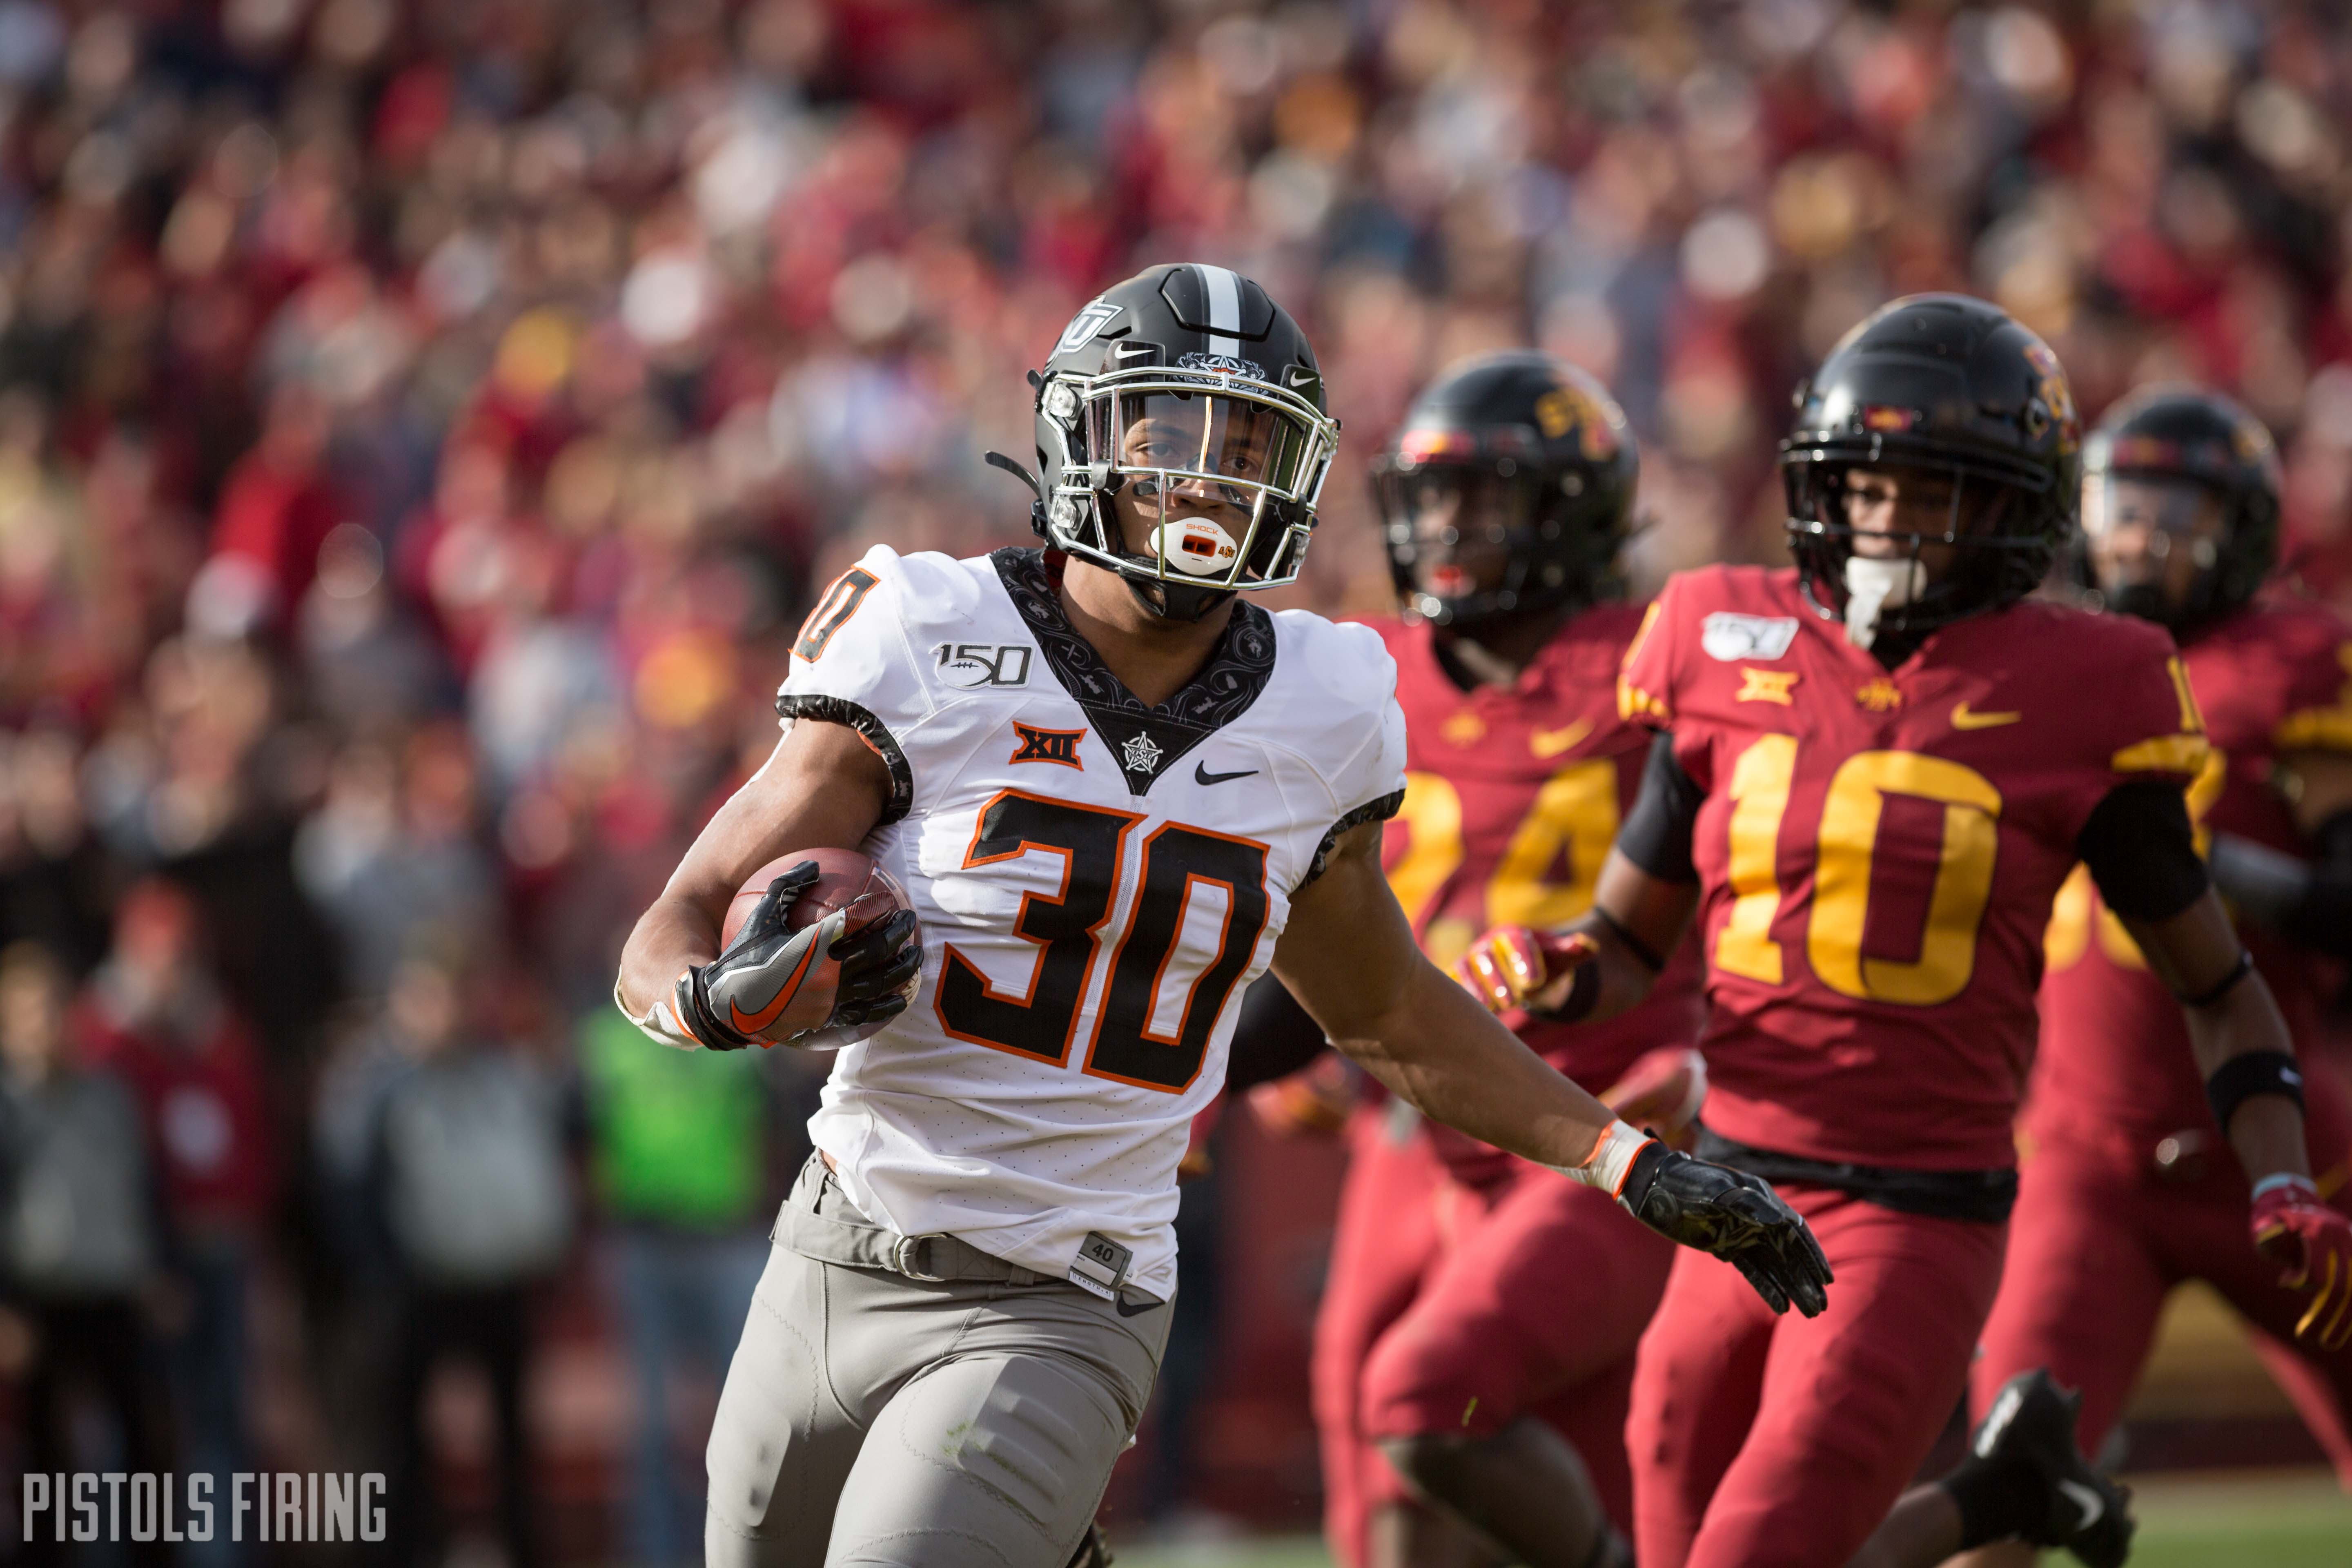 Oklahoma State vs. Iowa State The Best Photos from OSU's Road Win